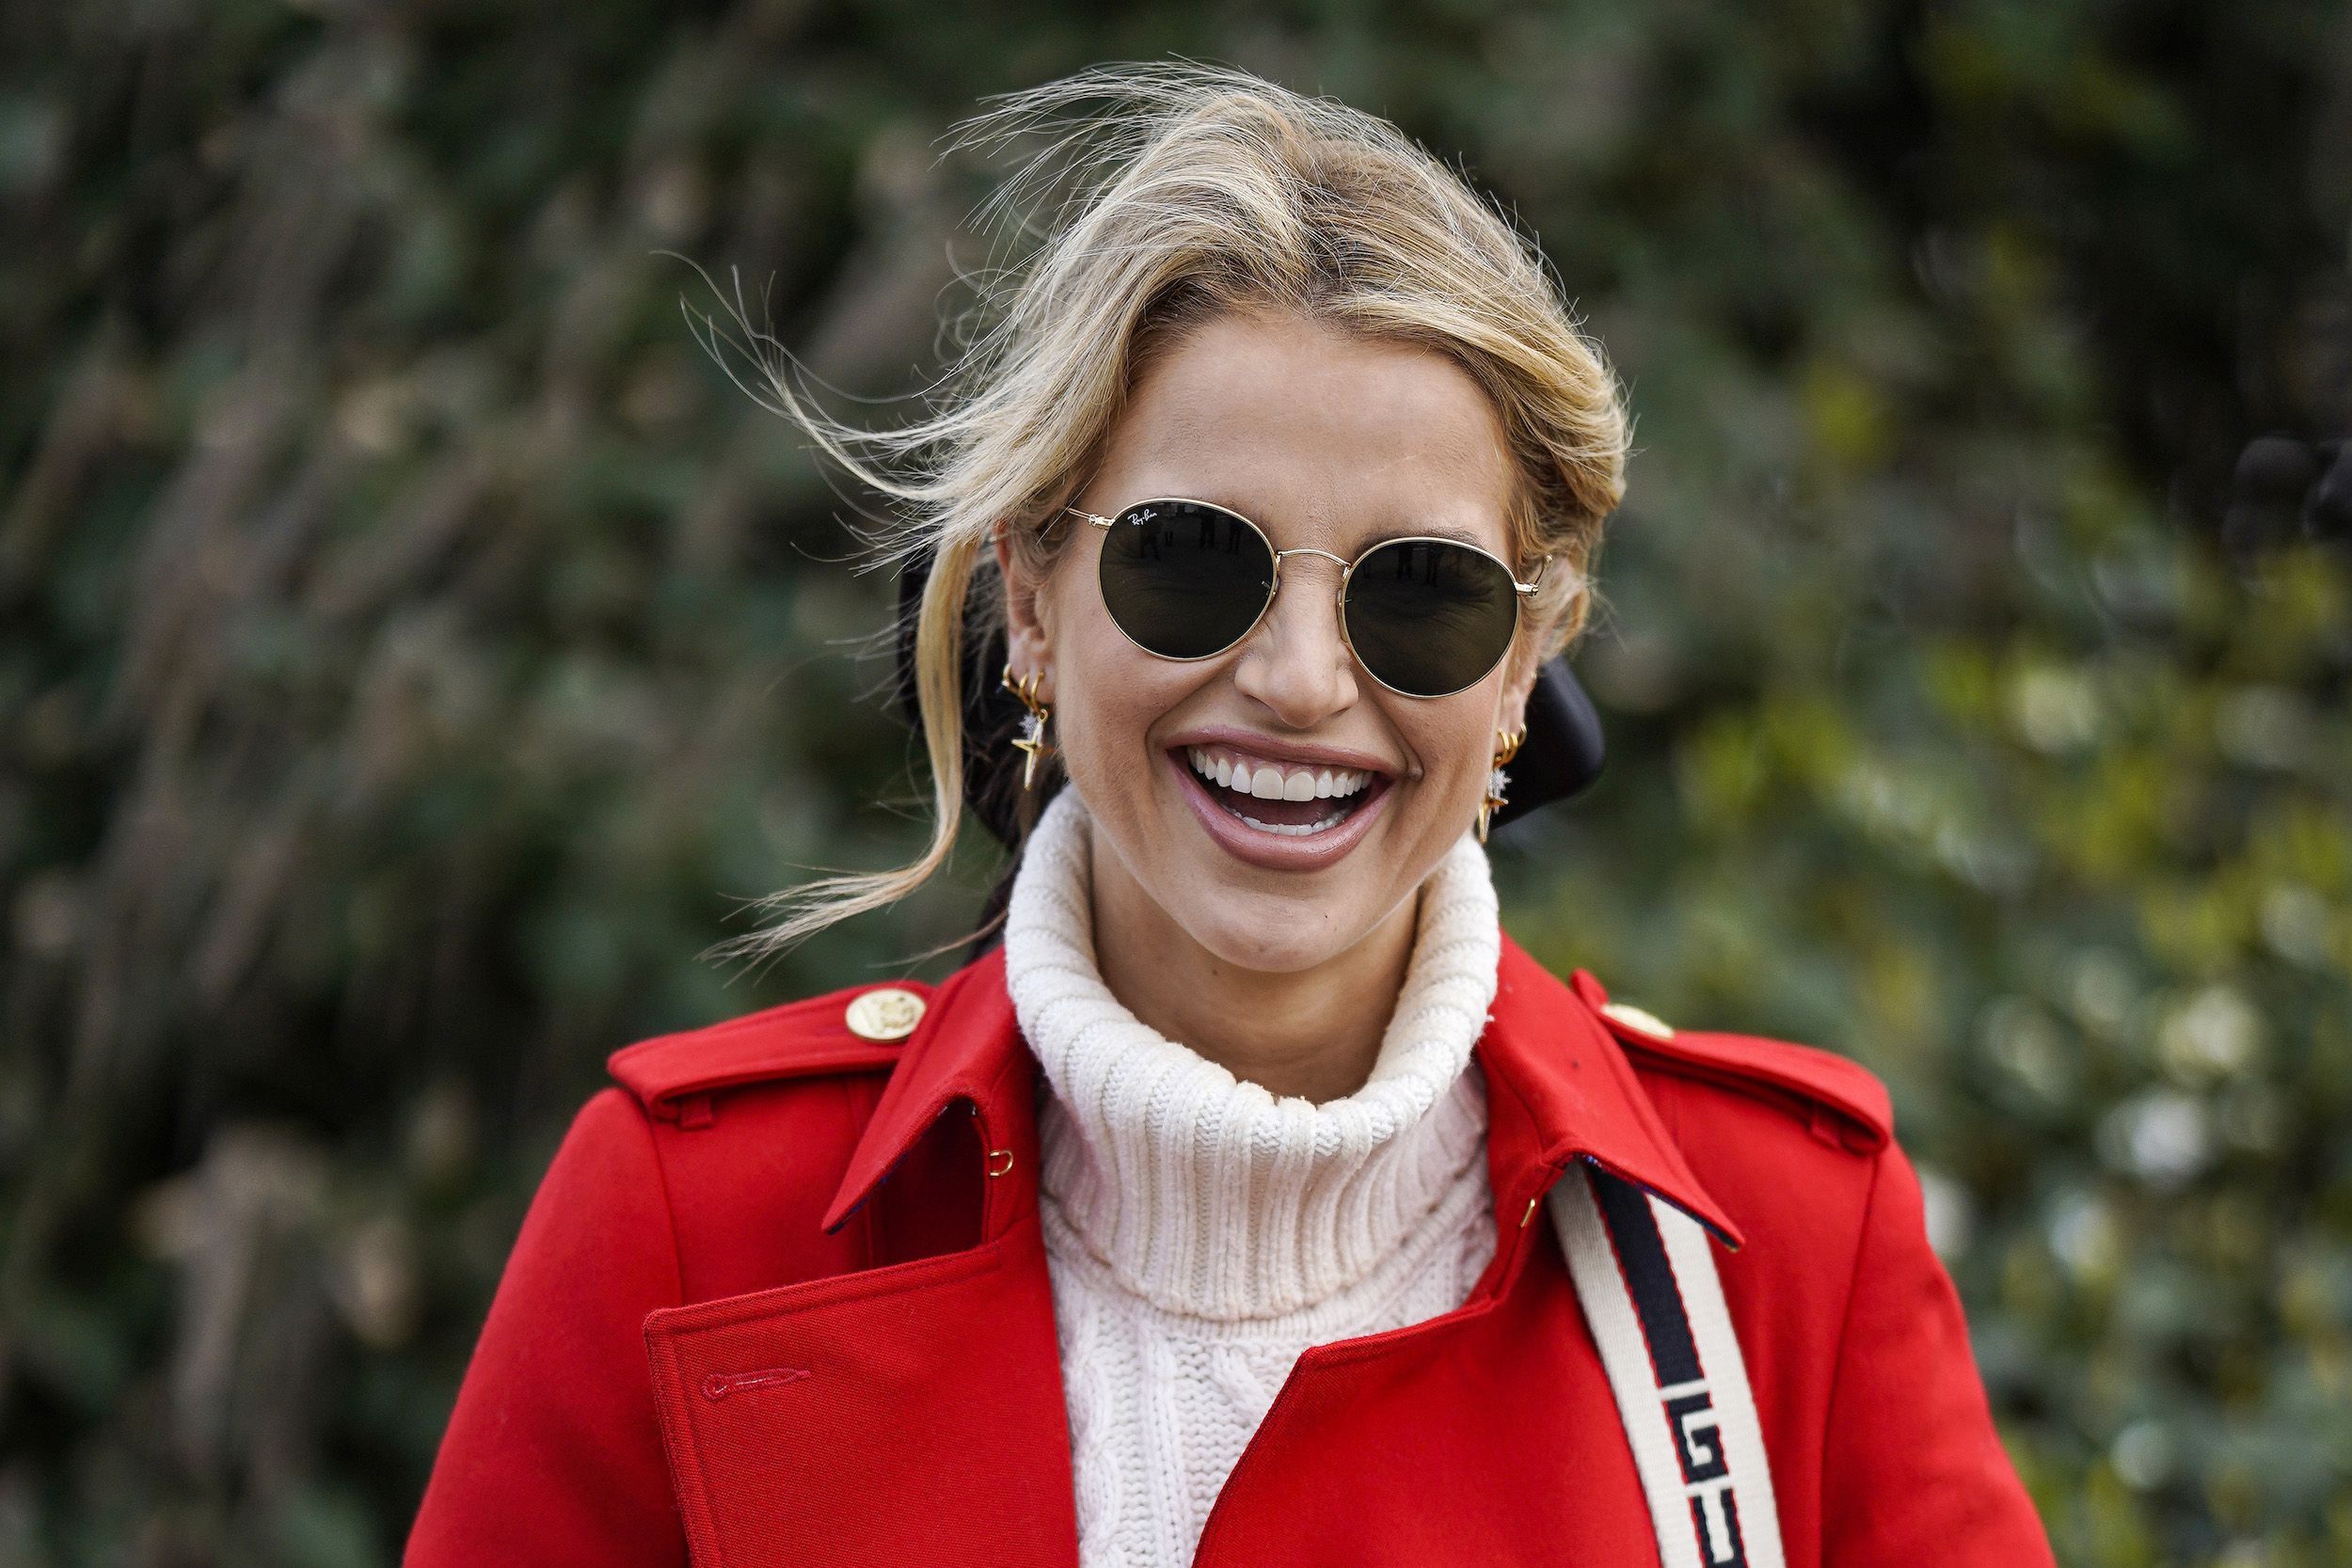 Vogue Williams shares her Marks & Spencer hero buys